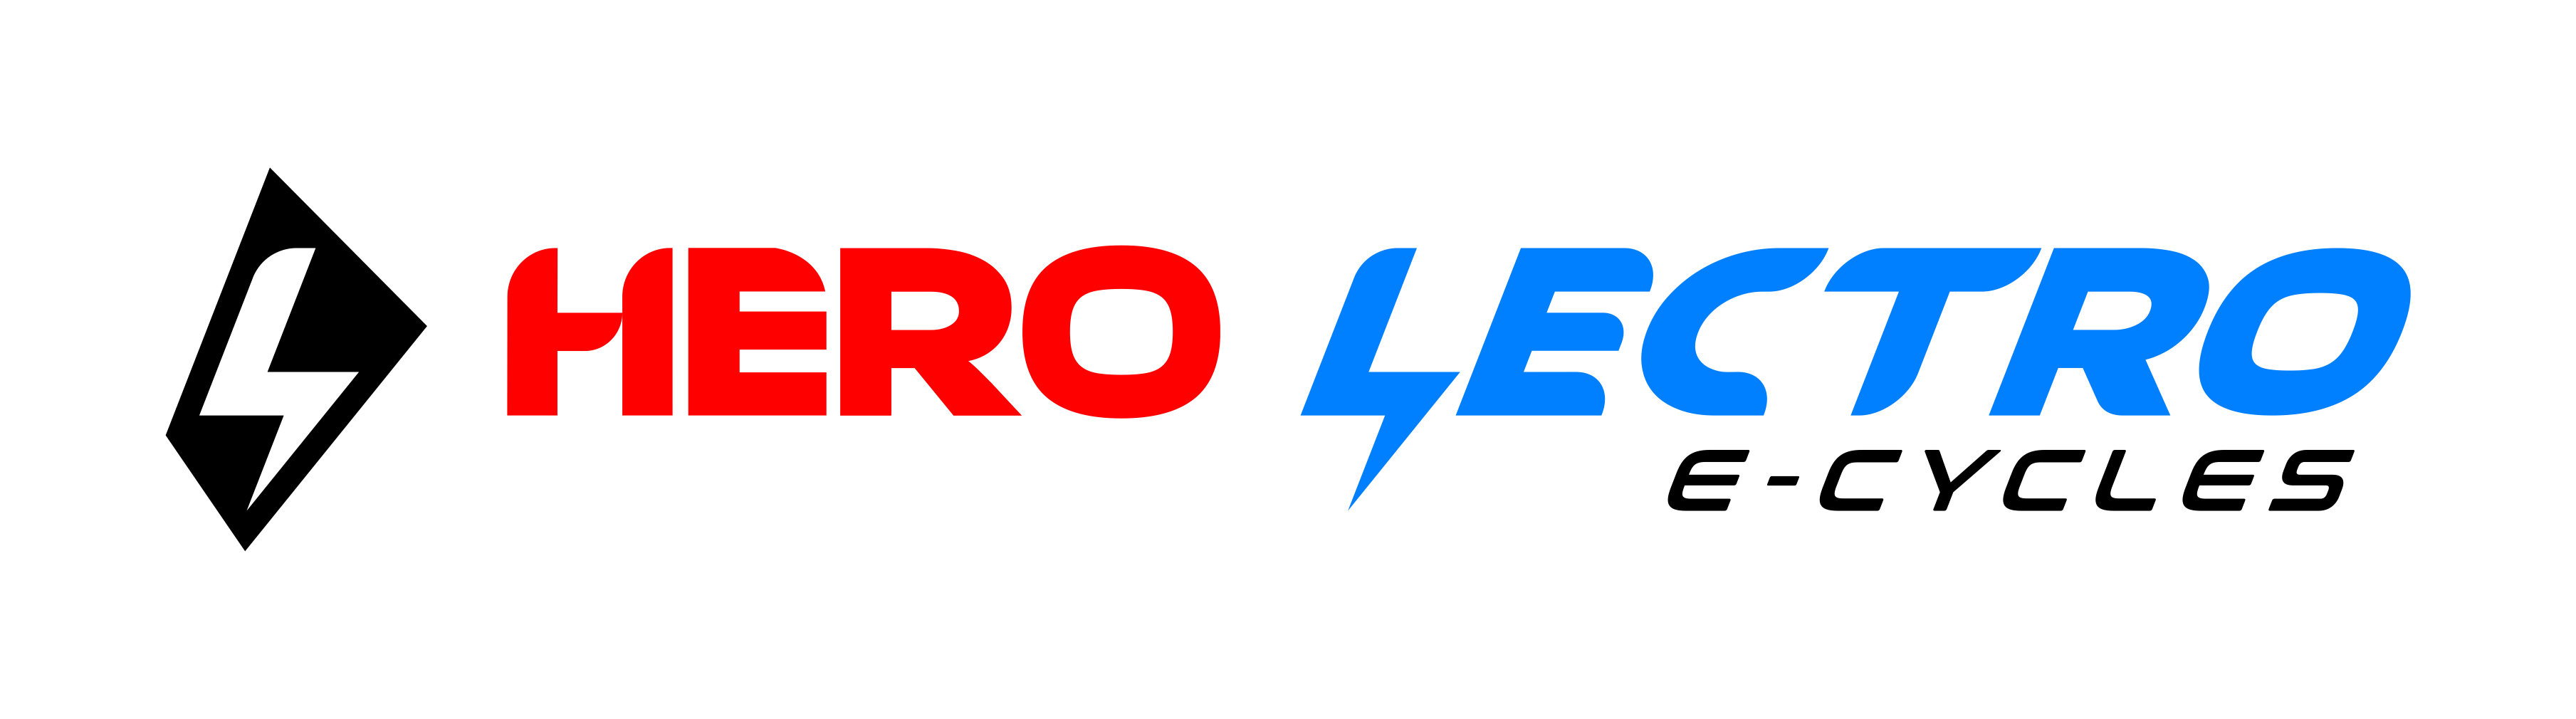 hero-lectro-launches-f6i-a-new-game-changing-smart-e-cycle-for-indias-passionate-young-cyclists